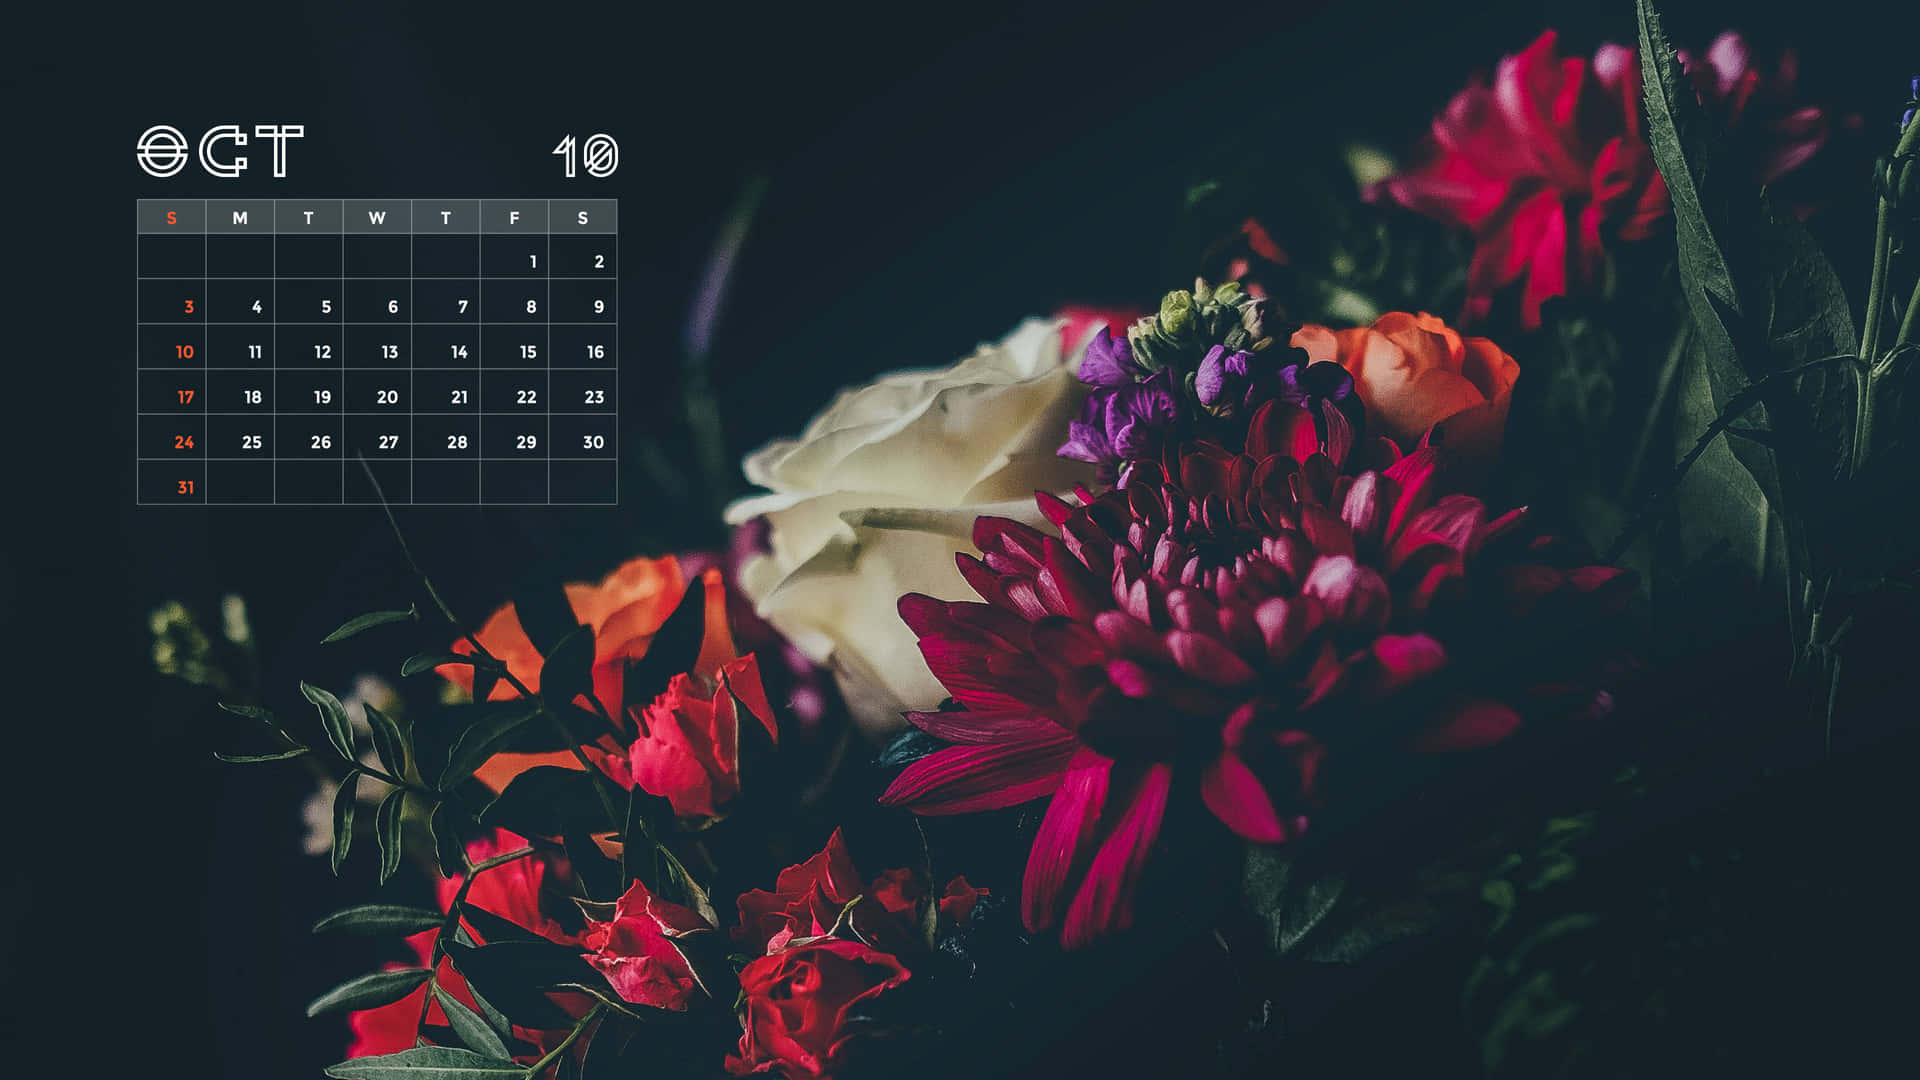 Get organized and plan ahead with this October 2021 Calendar Wallpaper